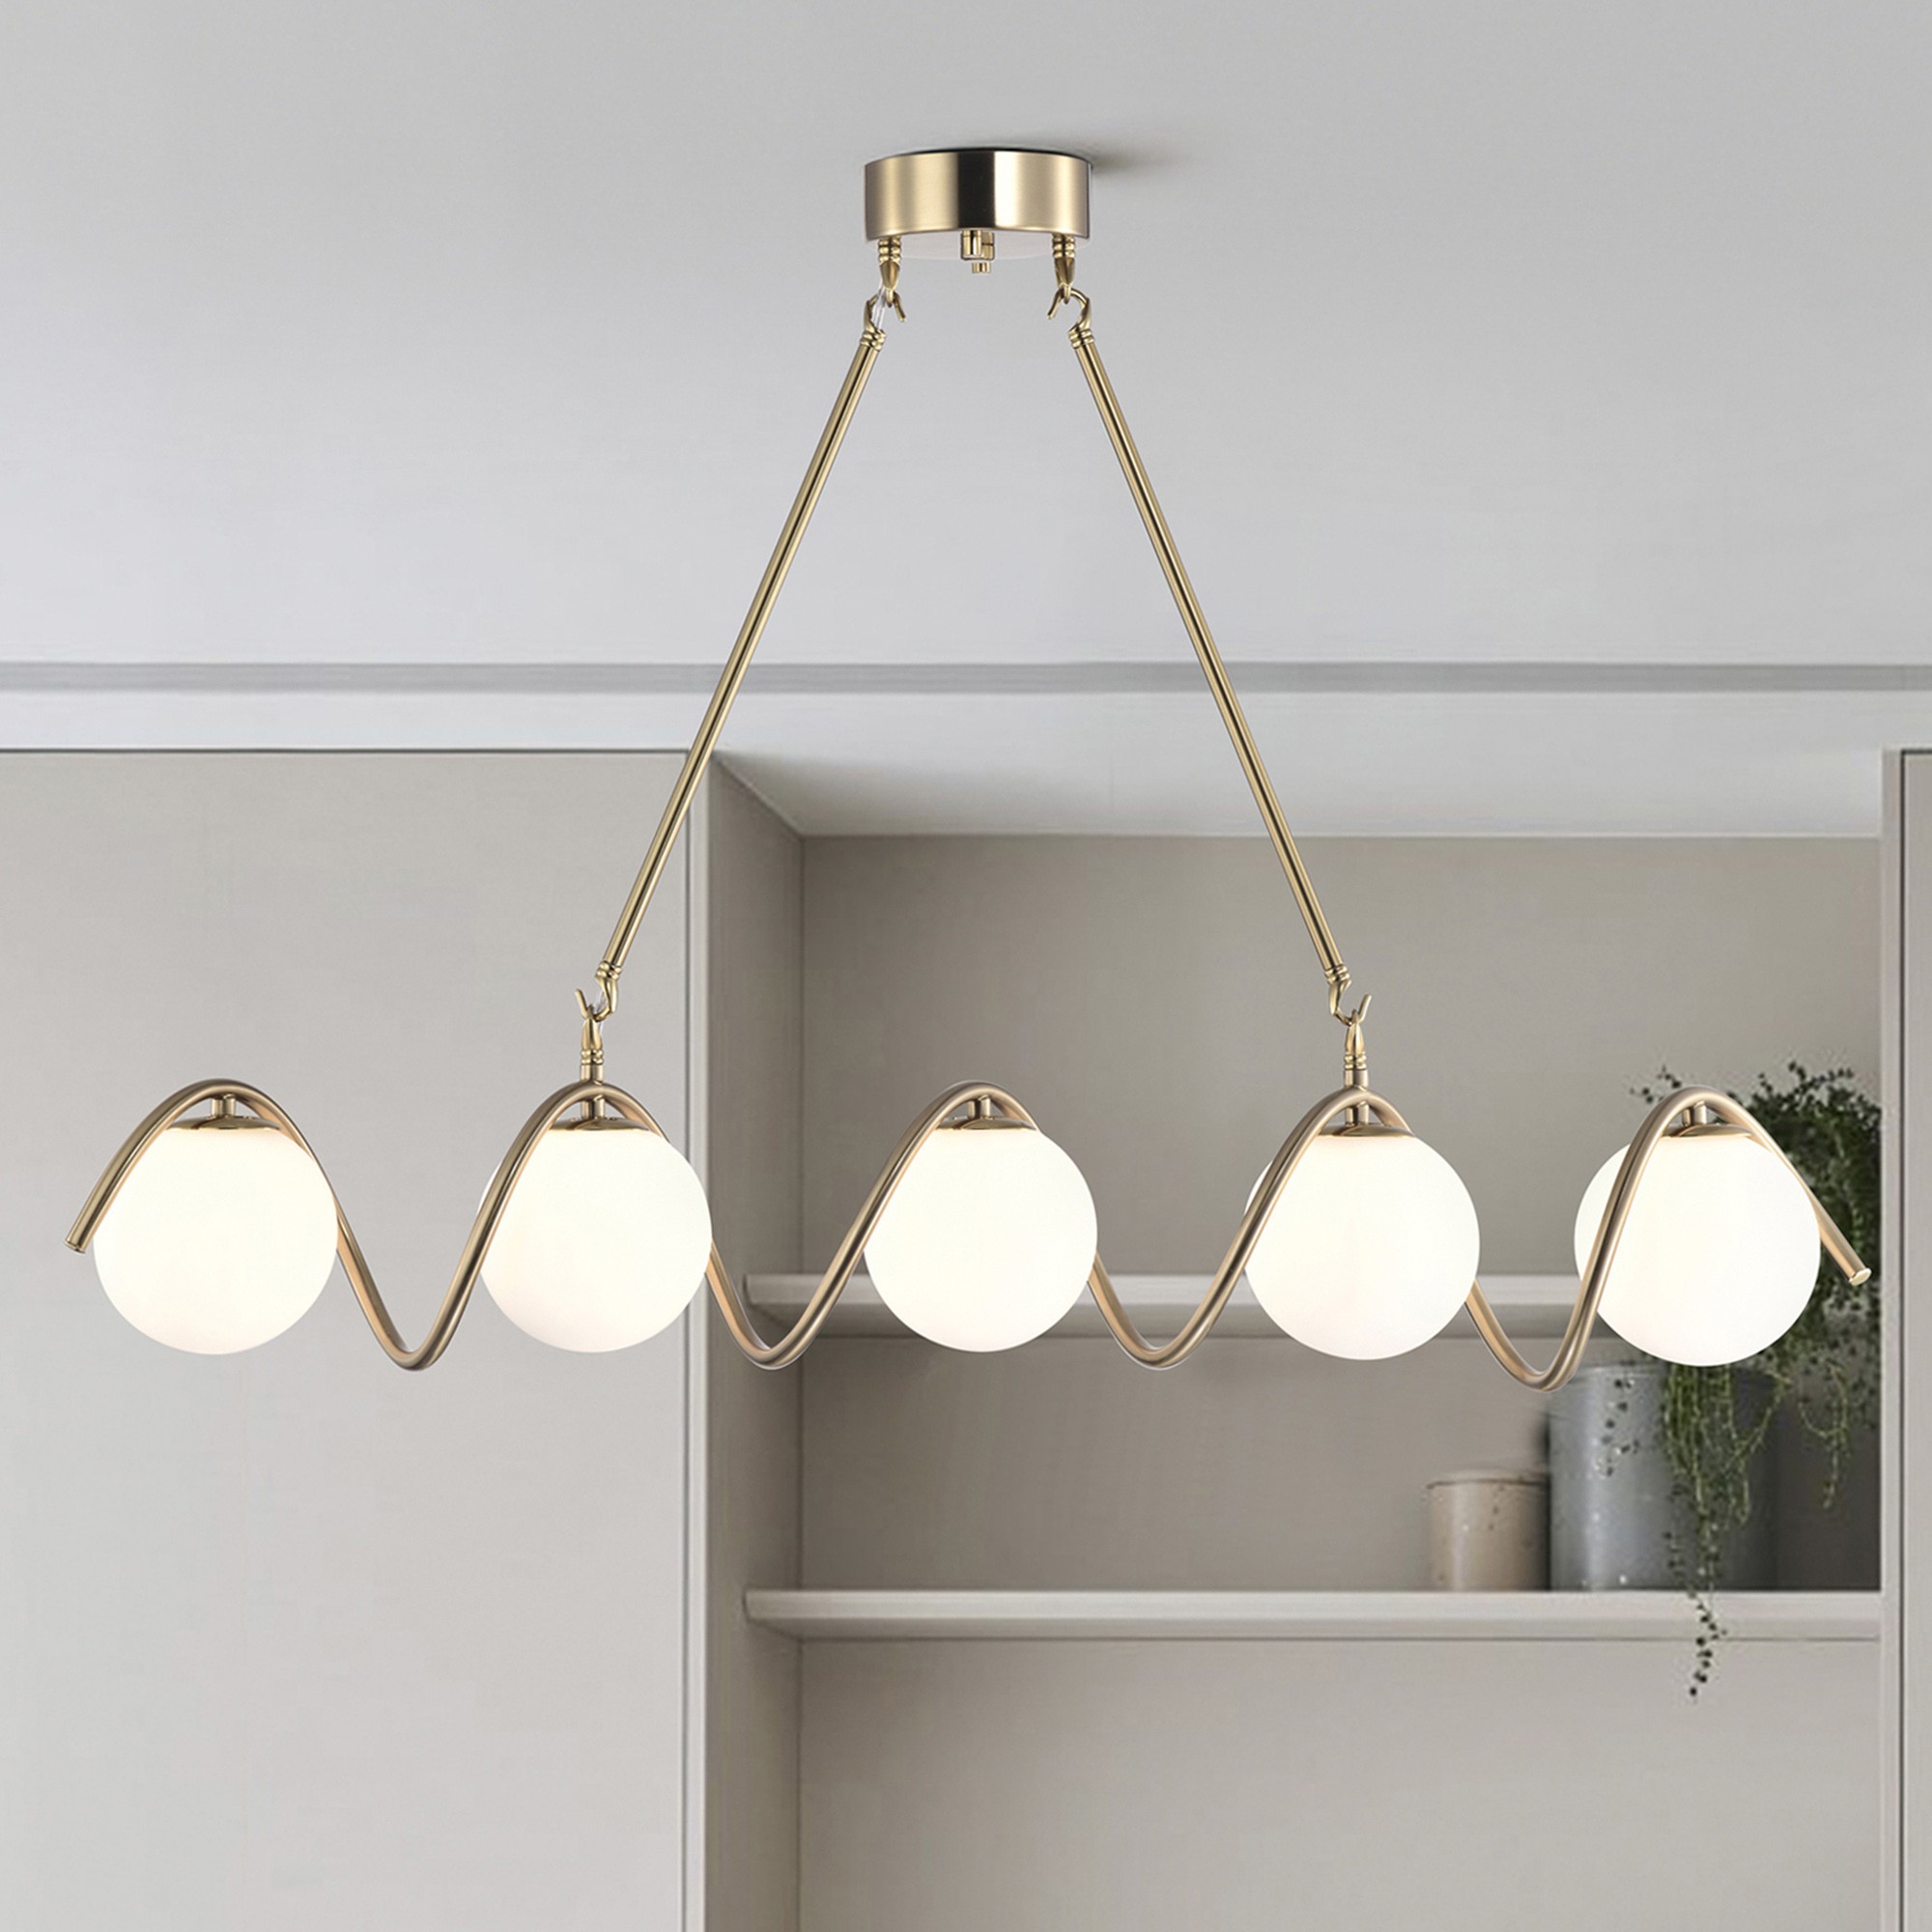 Dazzle 36 in. 5-Light Indoor Brass Finish Chandelier with Light Kit